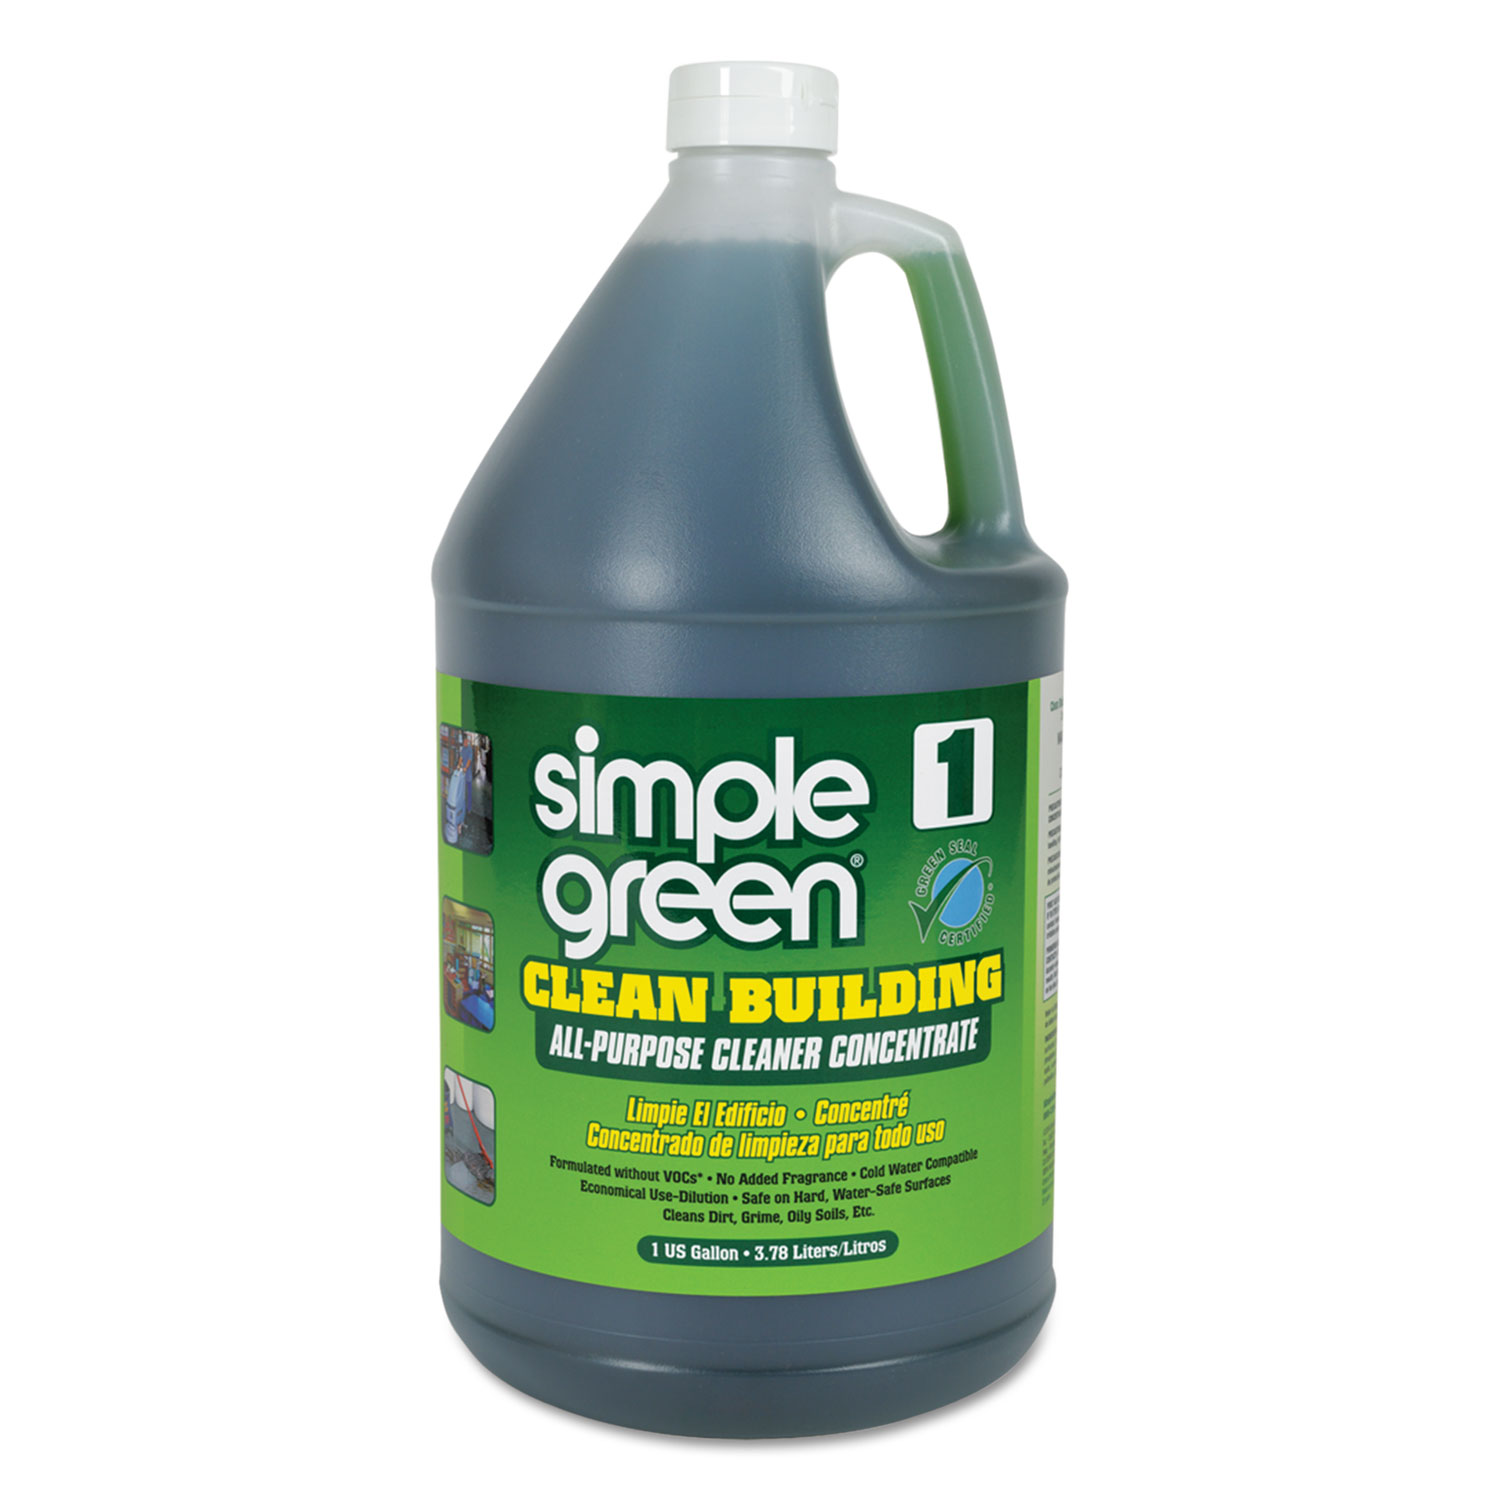  Simple Green 1210000211001 Clean Building All-Purpose Cleaner Concentrate, 1gal Bottle (SMP11001) 